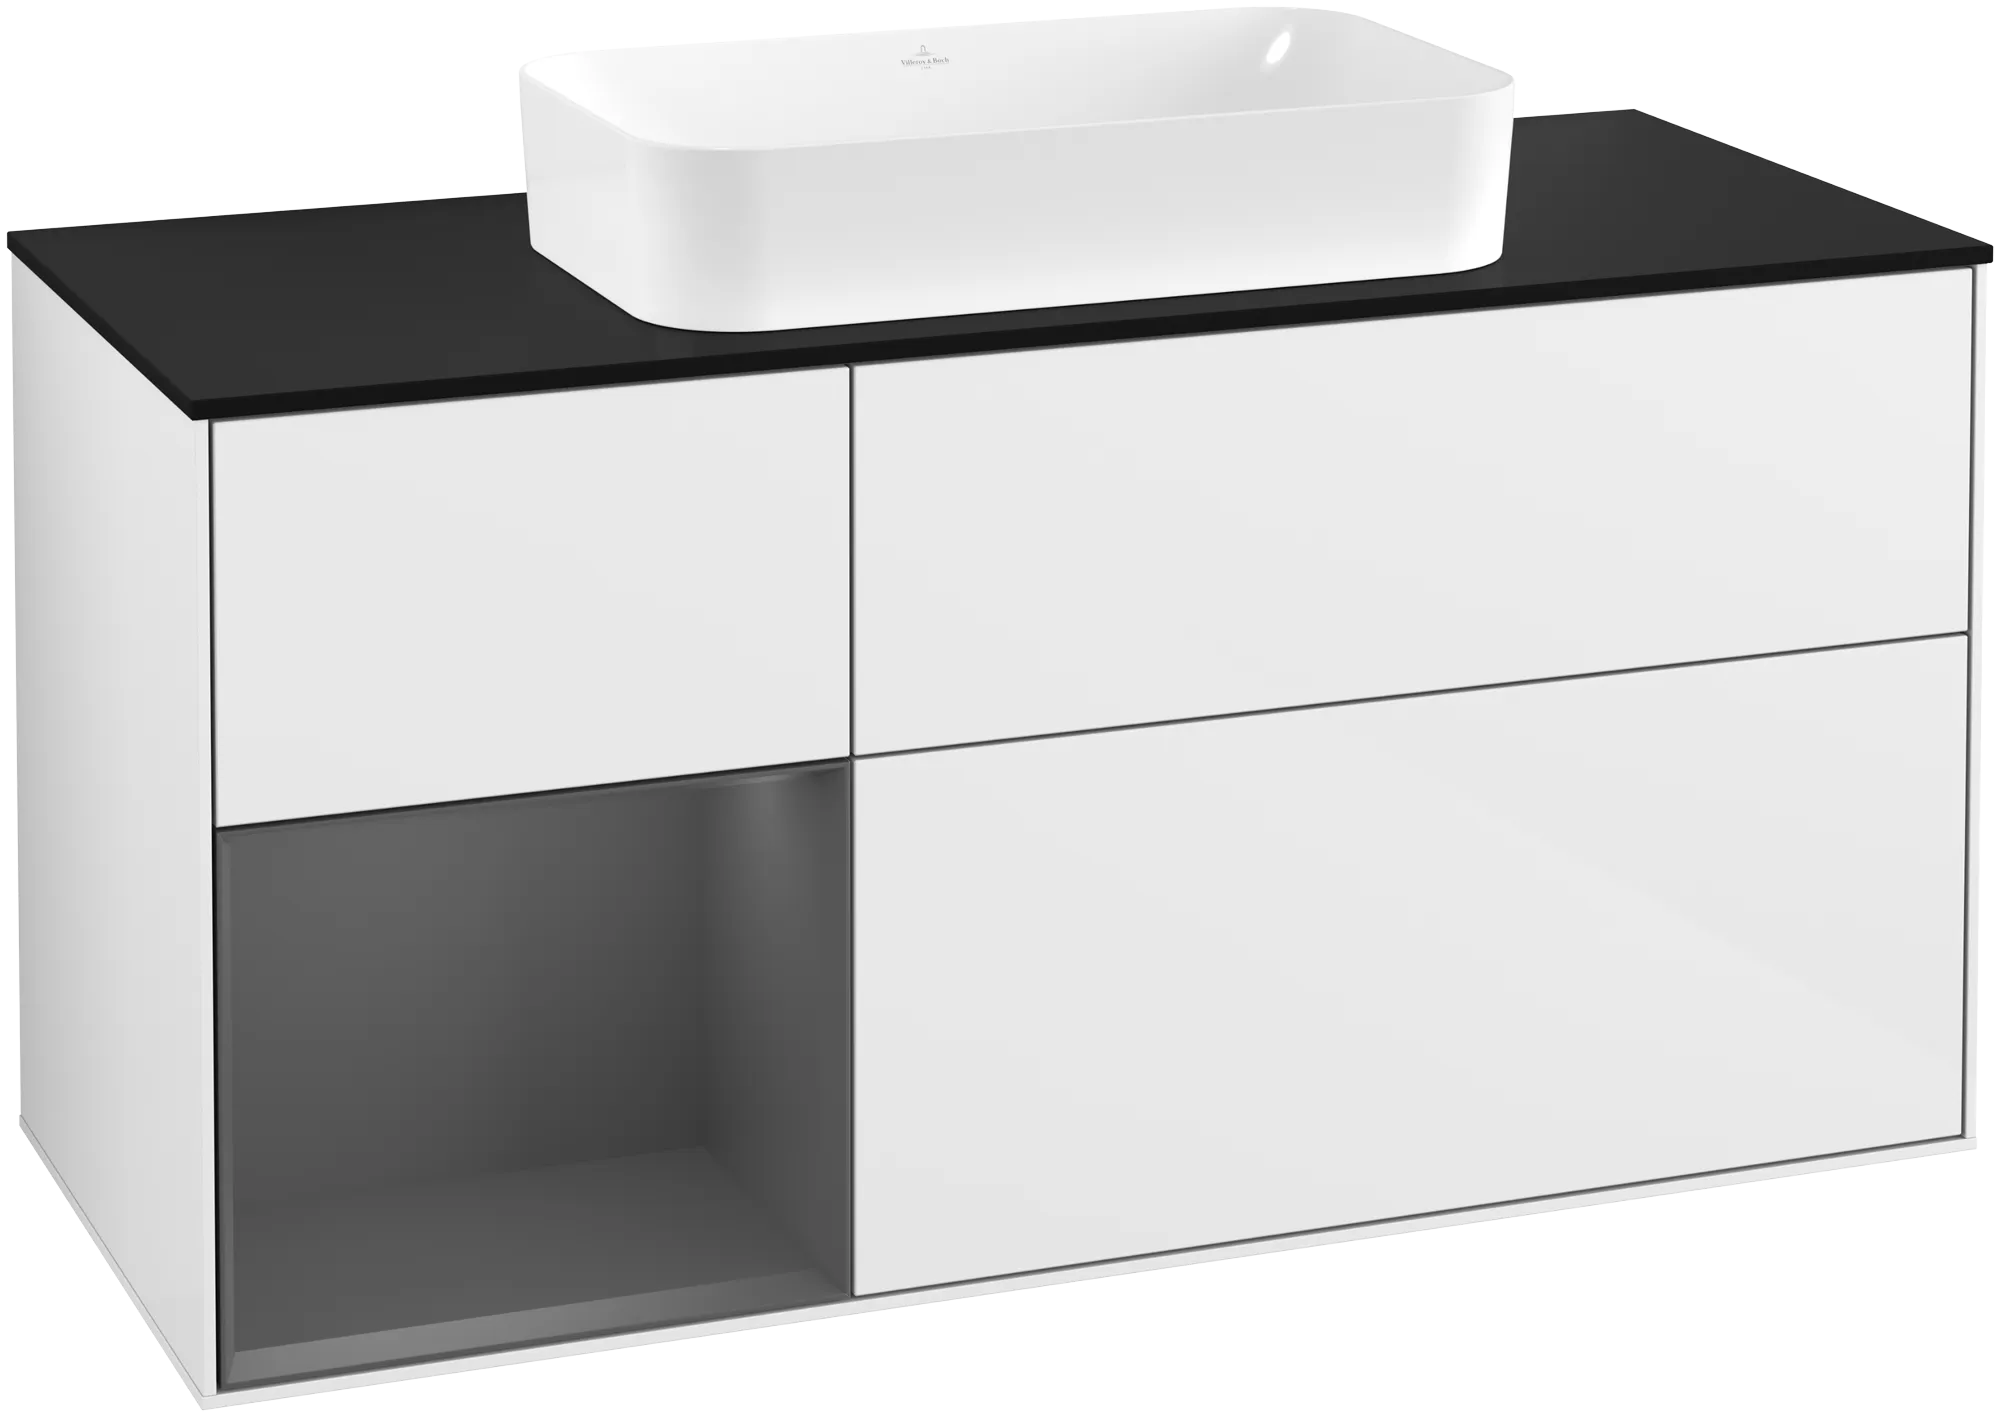 Picture of VILLEROY BOCH Finion Vanity unit, with lighting, 3 pull-out compartments, 1200 x 603 x 501 mm, Glossy White Lacquer / Anthracite Matt Lacquer / Glass Black Matt #G292GKGF